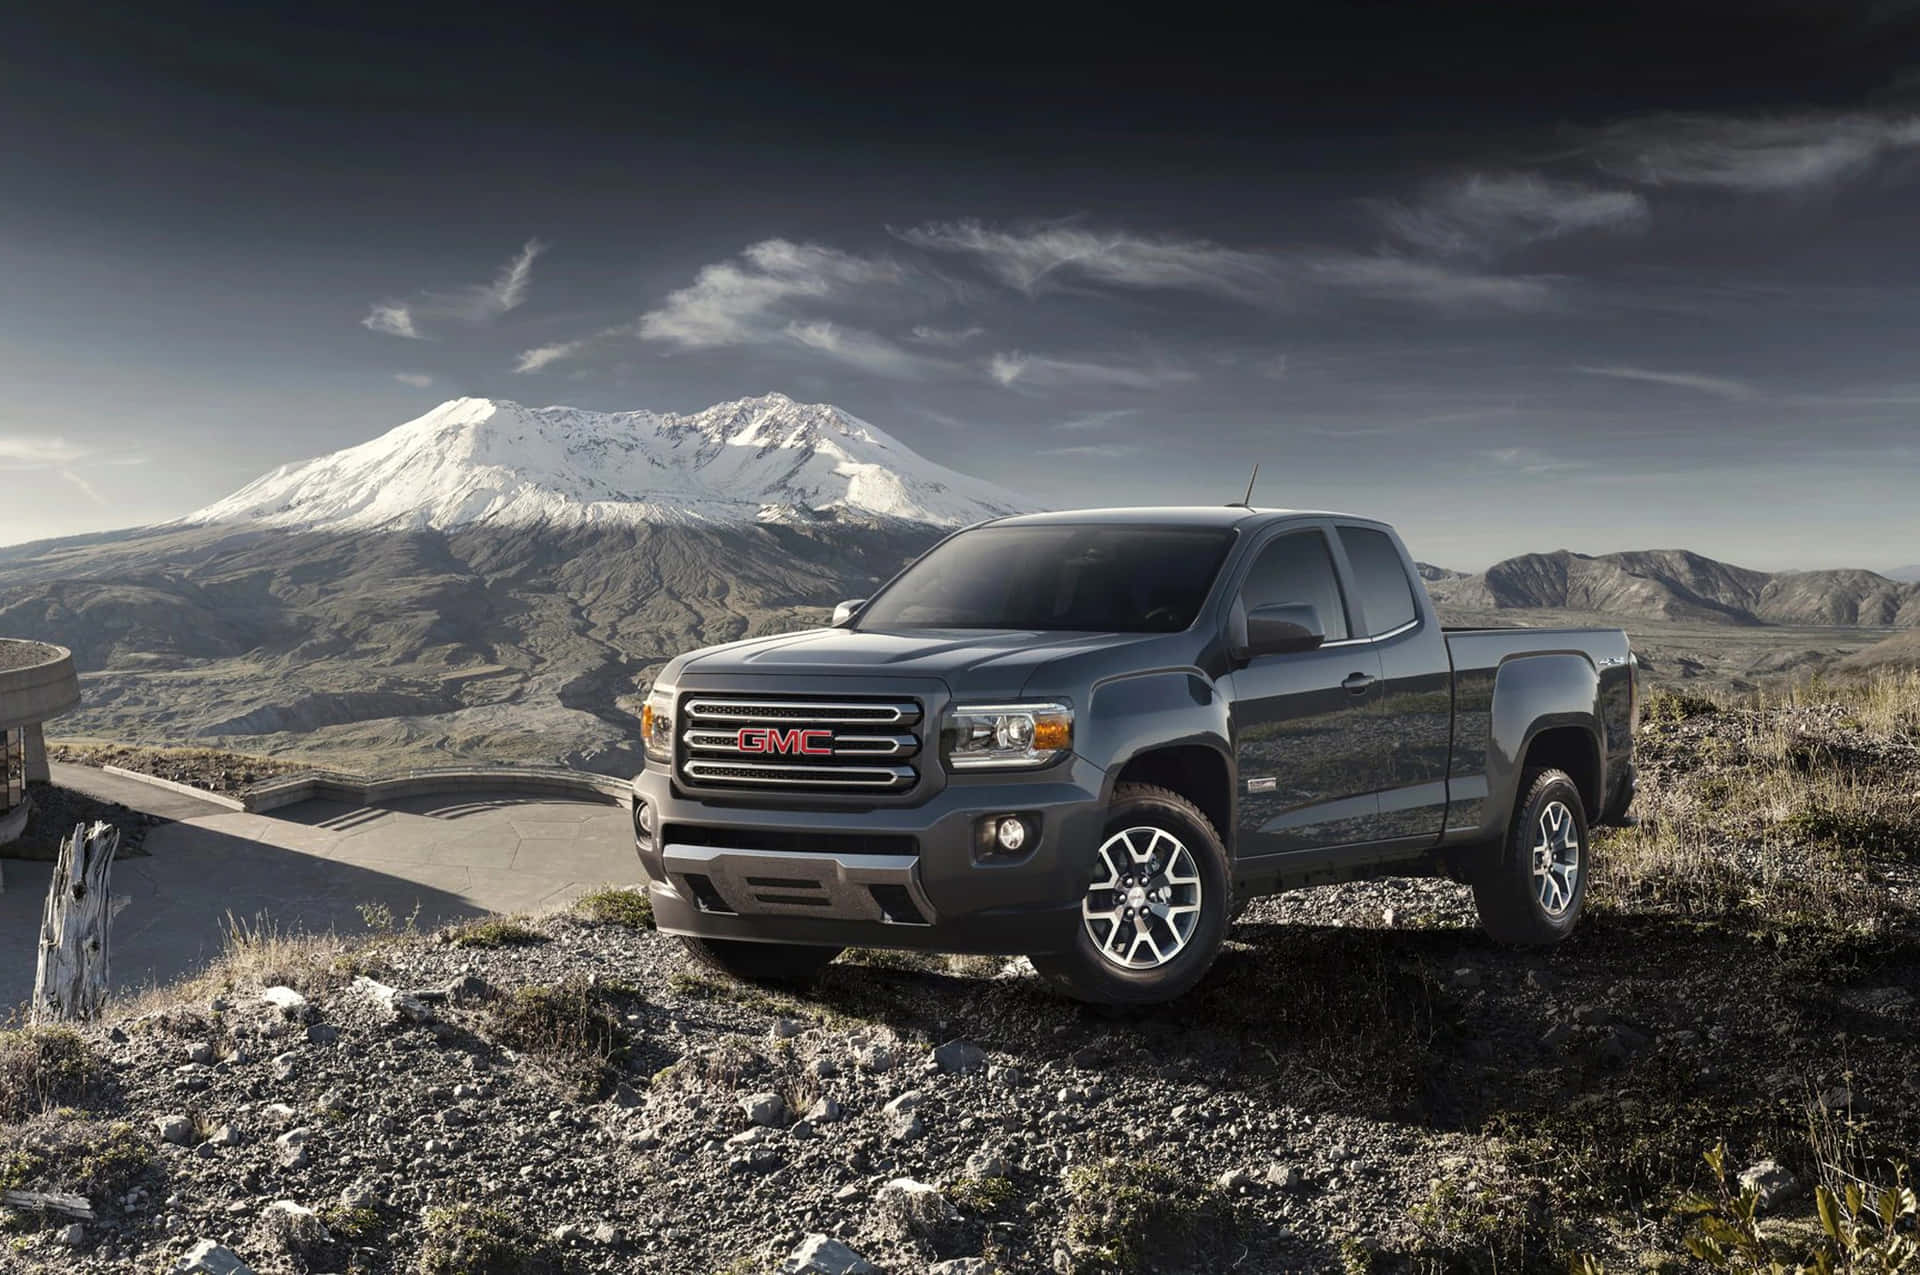 Sleek and Rugged GMC Canyon in Natural Scenery Wallpaper